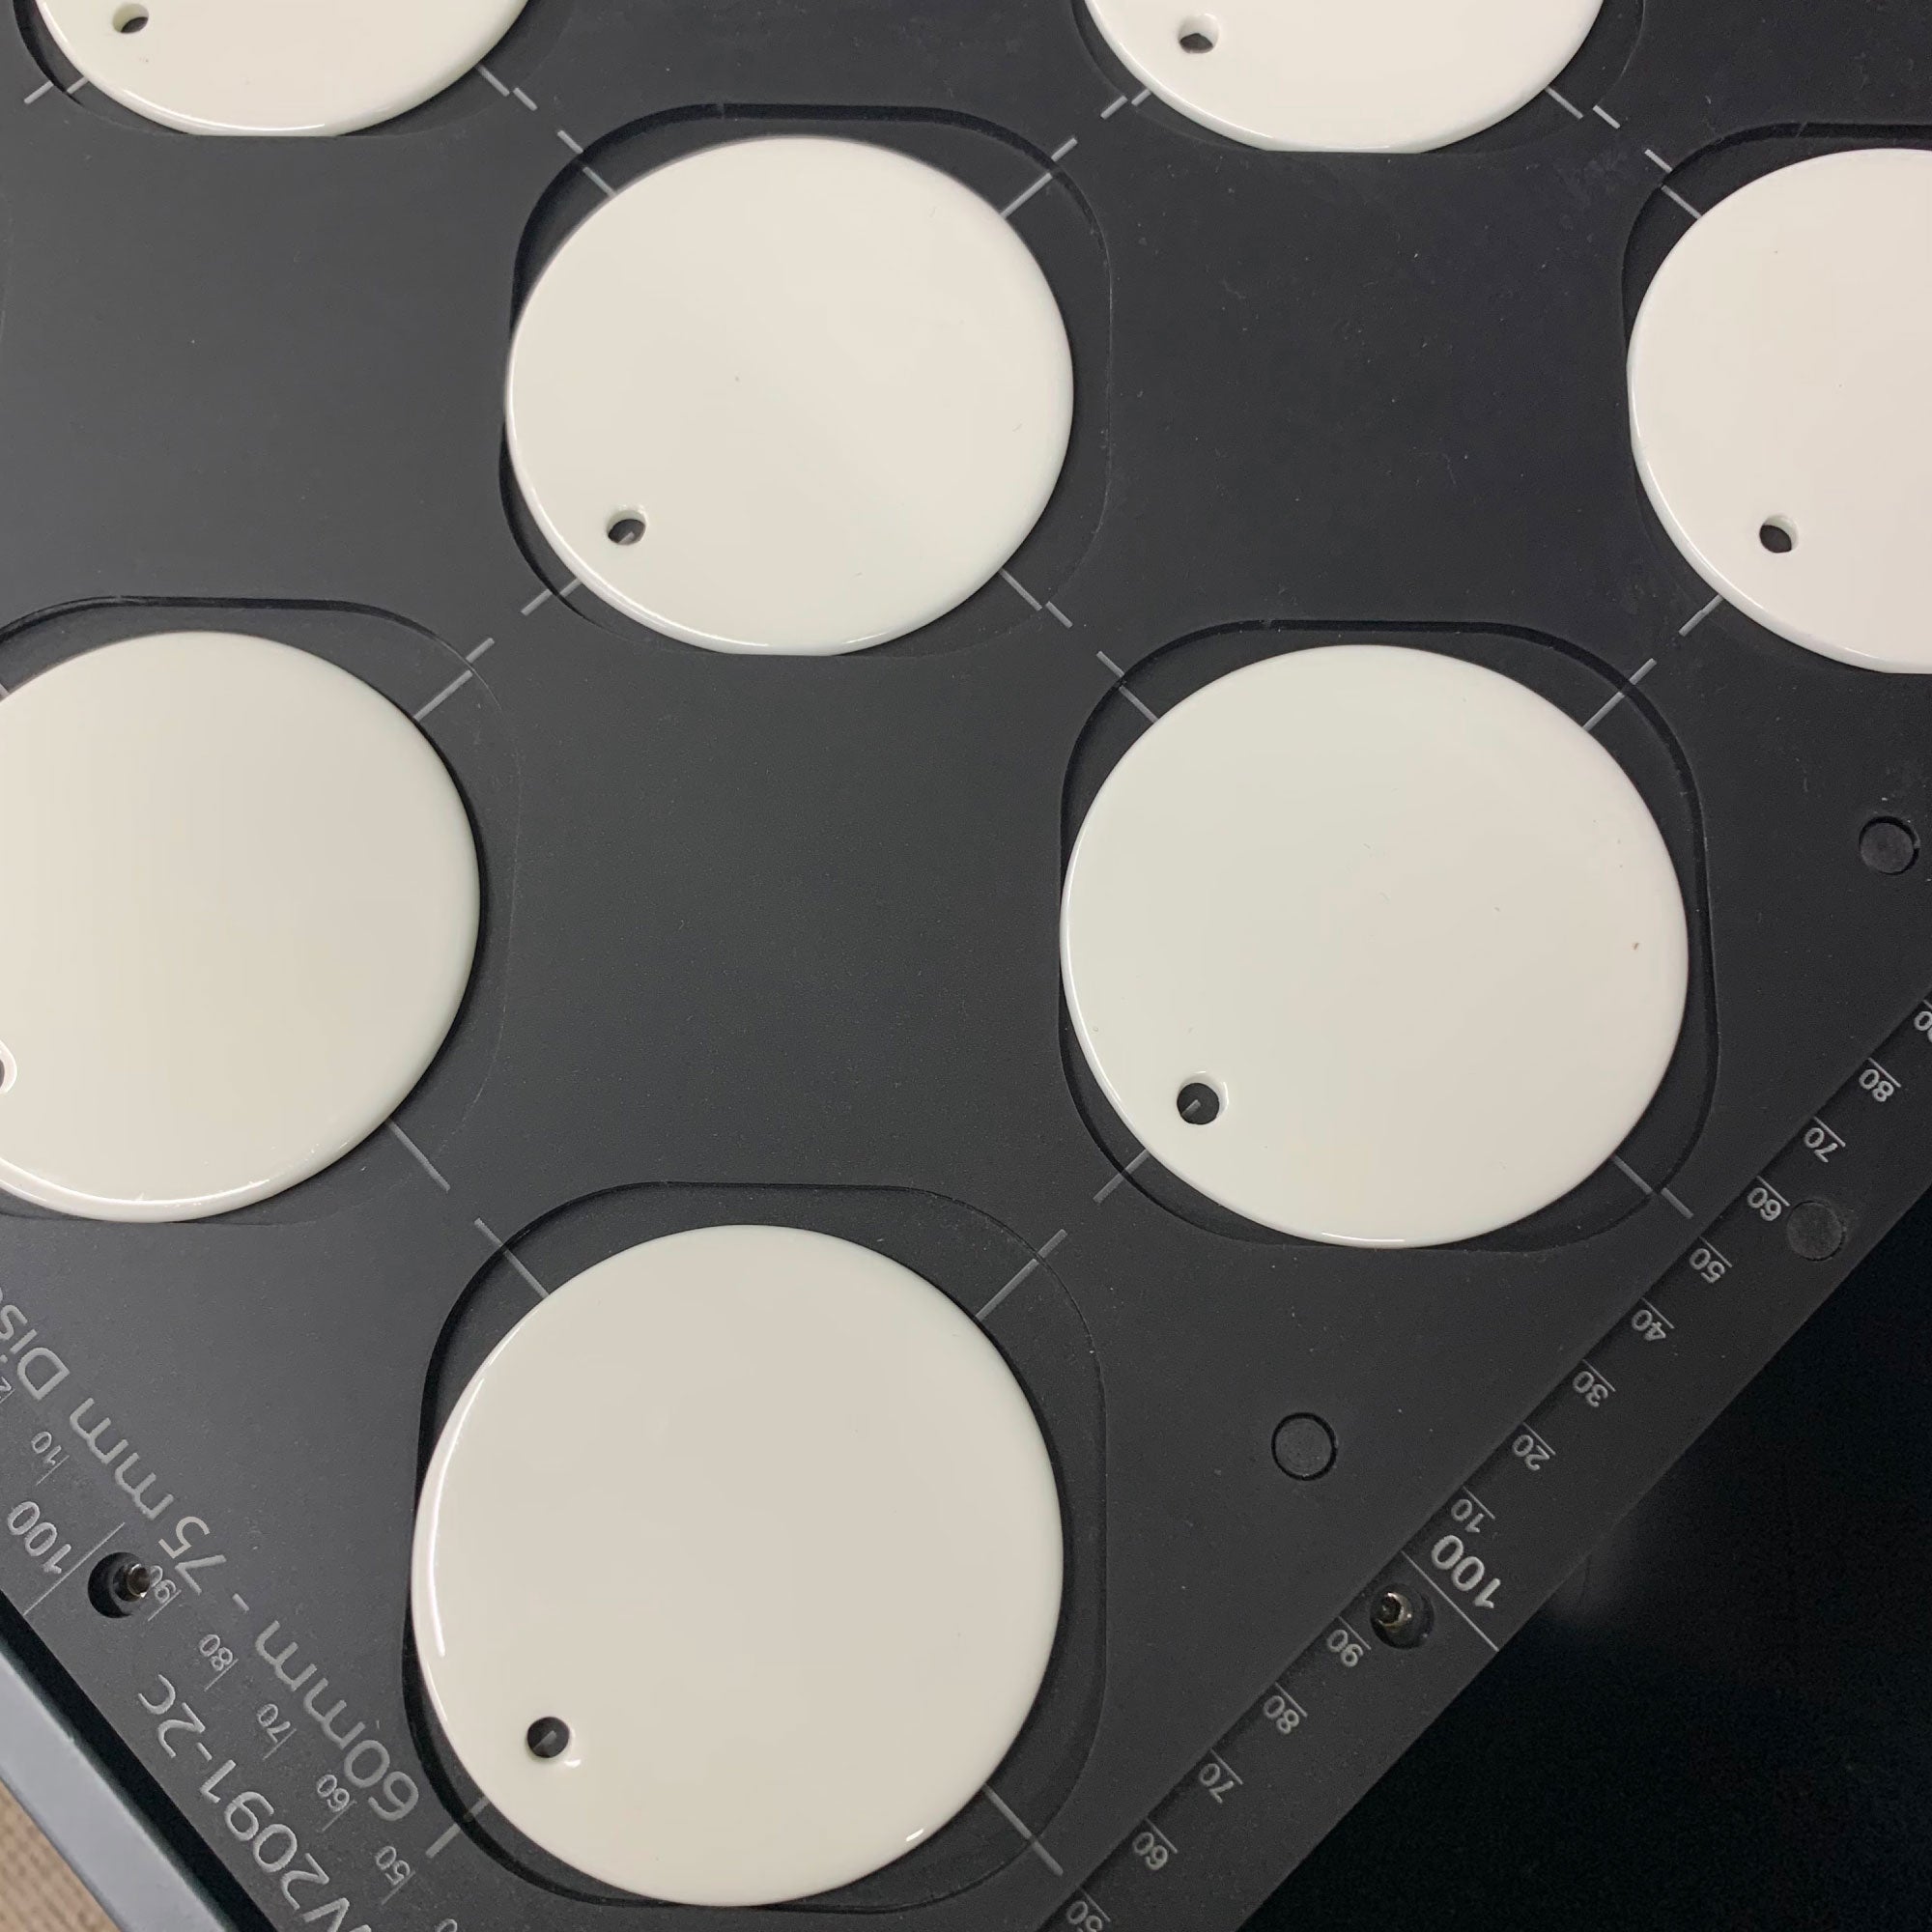 Ceramic Christmas Bauble Printing Jig for Mimaki UJF-7151 Flatbed Printer: 60mm - 77mm Circular Discs (xx Spaces)